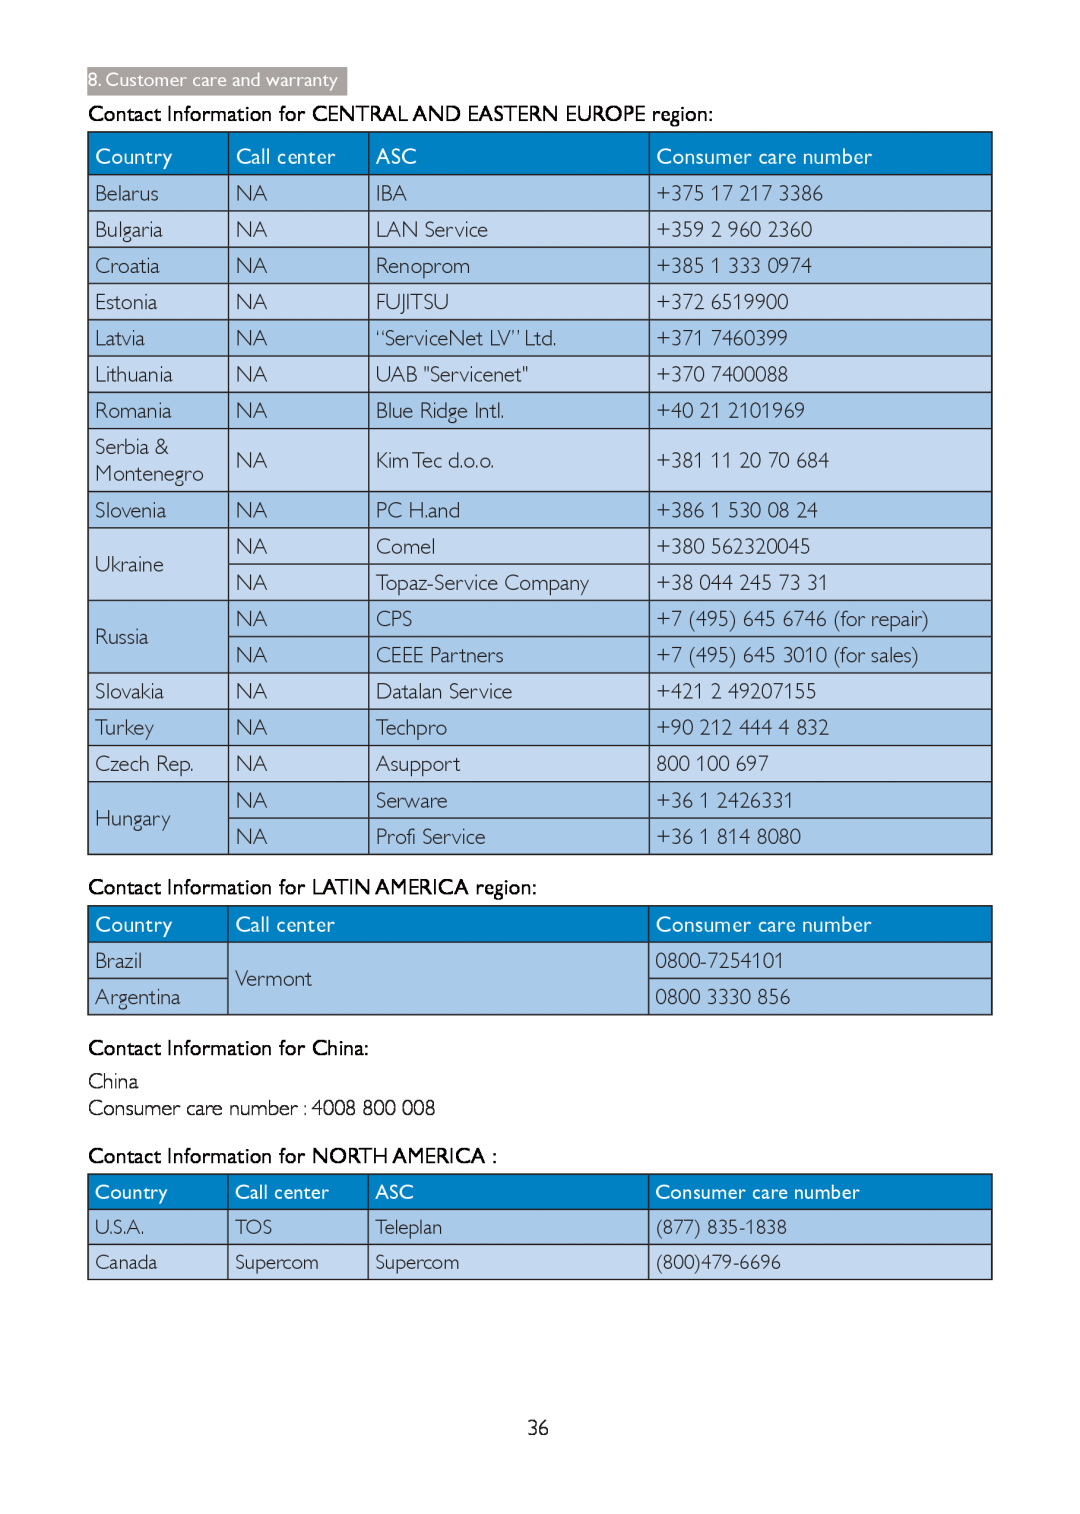 Philips 273G3D Contact Information for CENTRAL AND EASTERN EUROPE region, Call center, Country, Consumer care number 